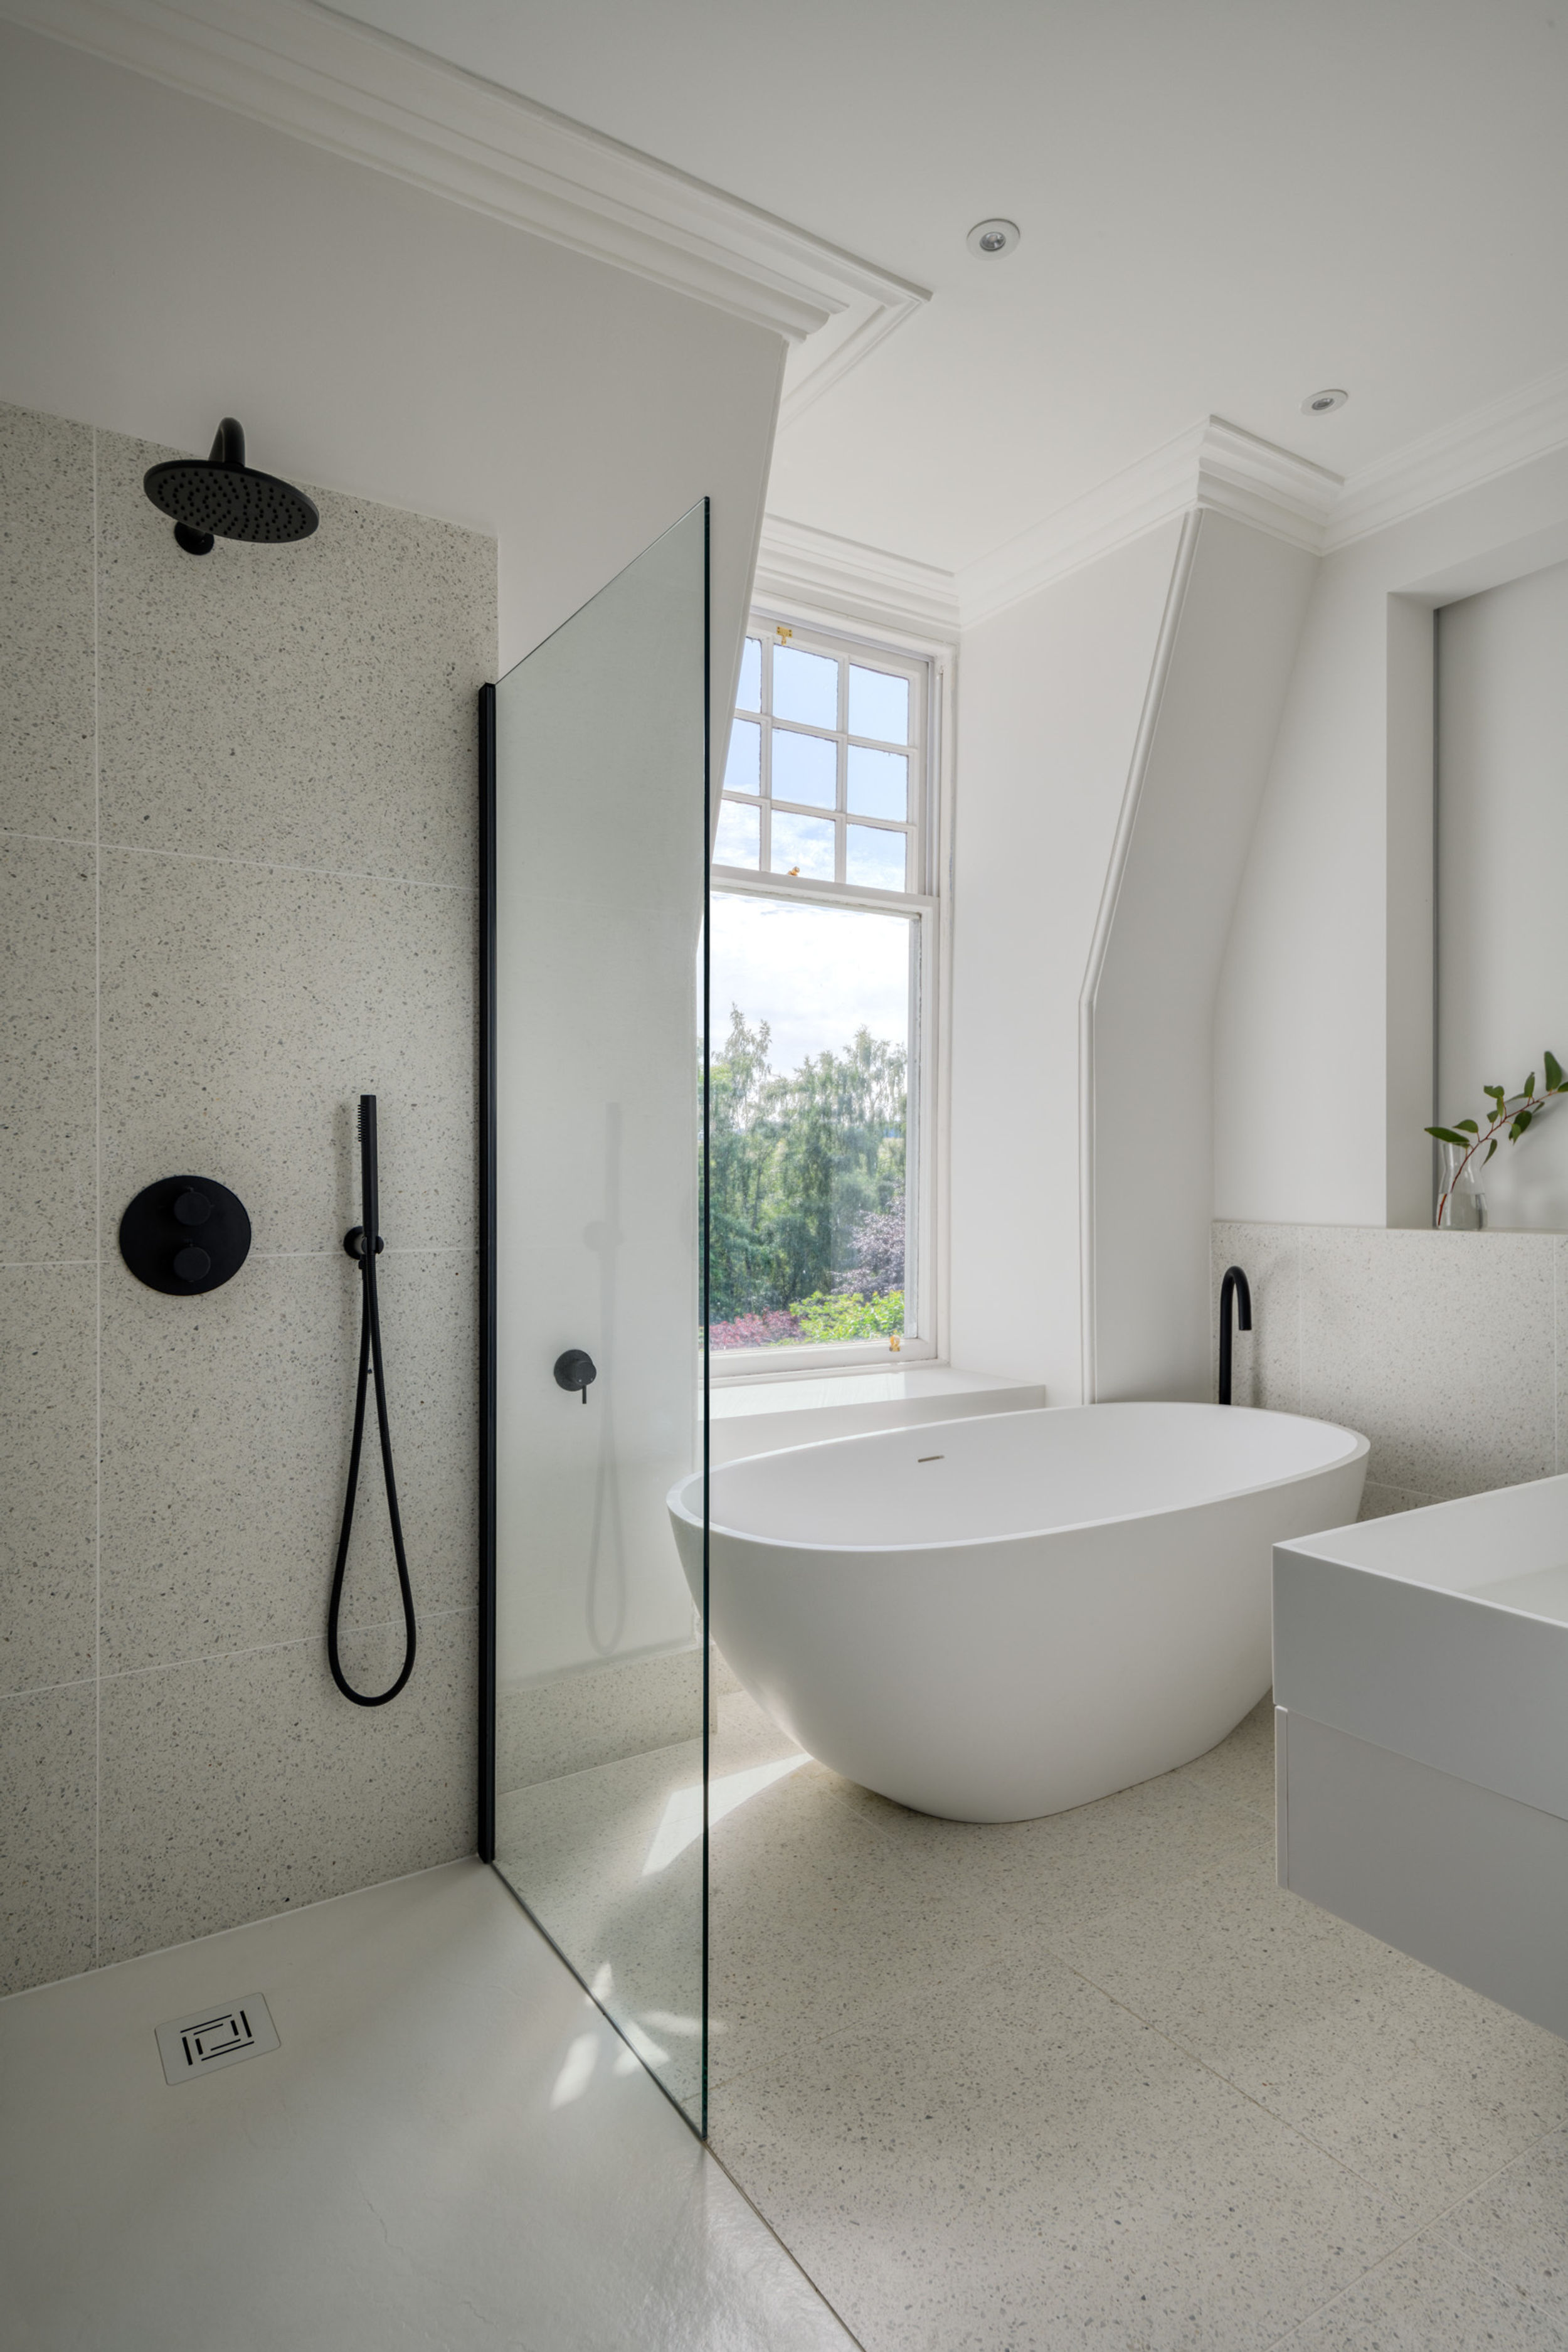 Tiled bathroom with stand-up shower and black fixtures, a white freestanding bath and window view of trees